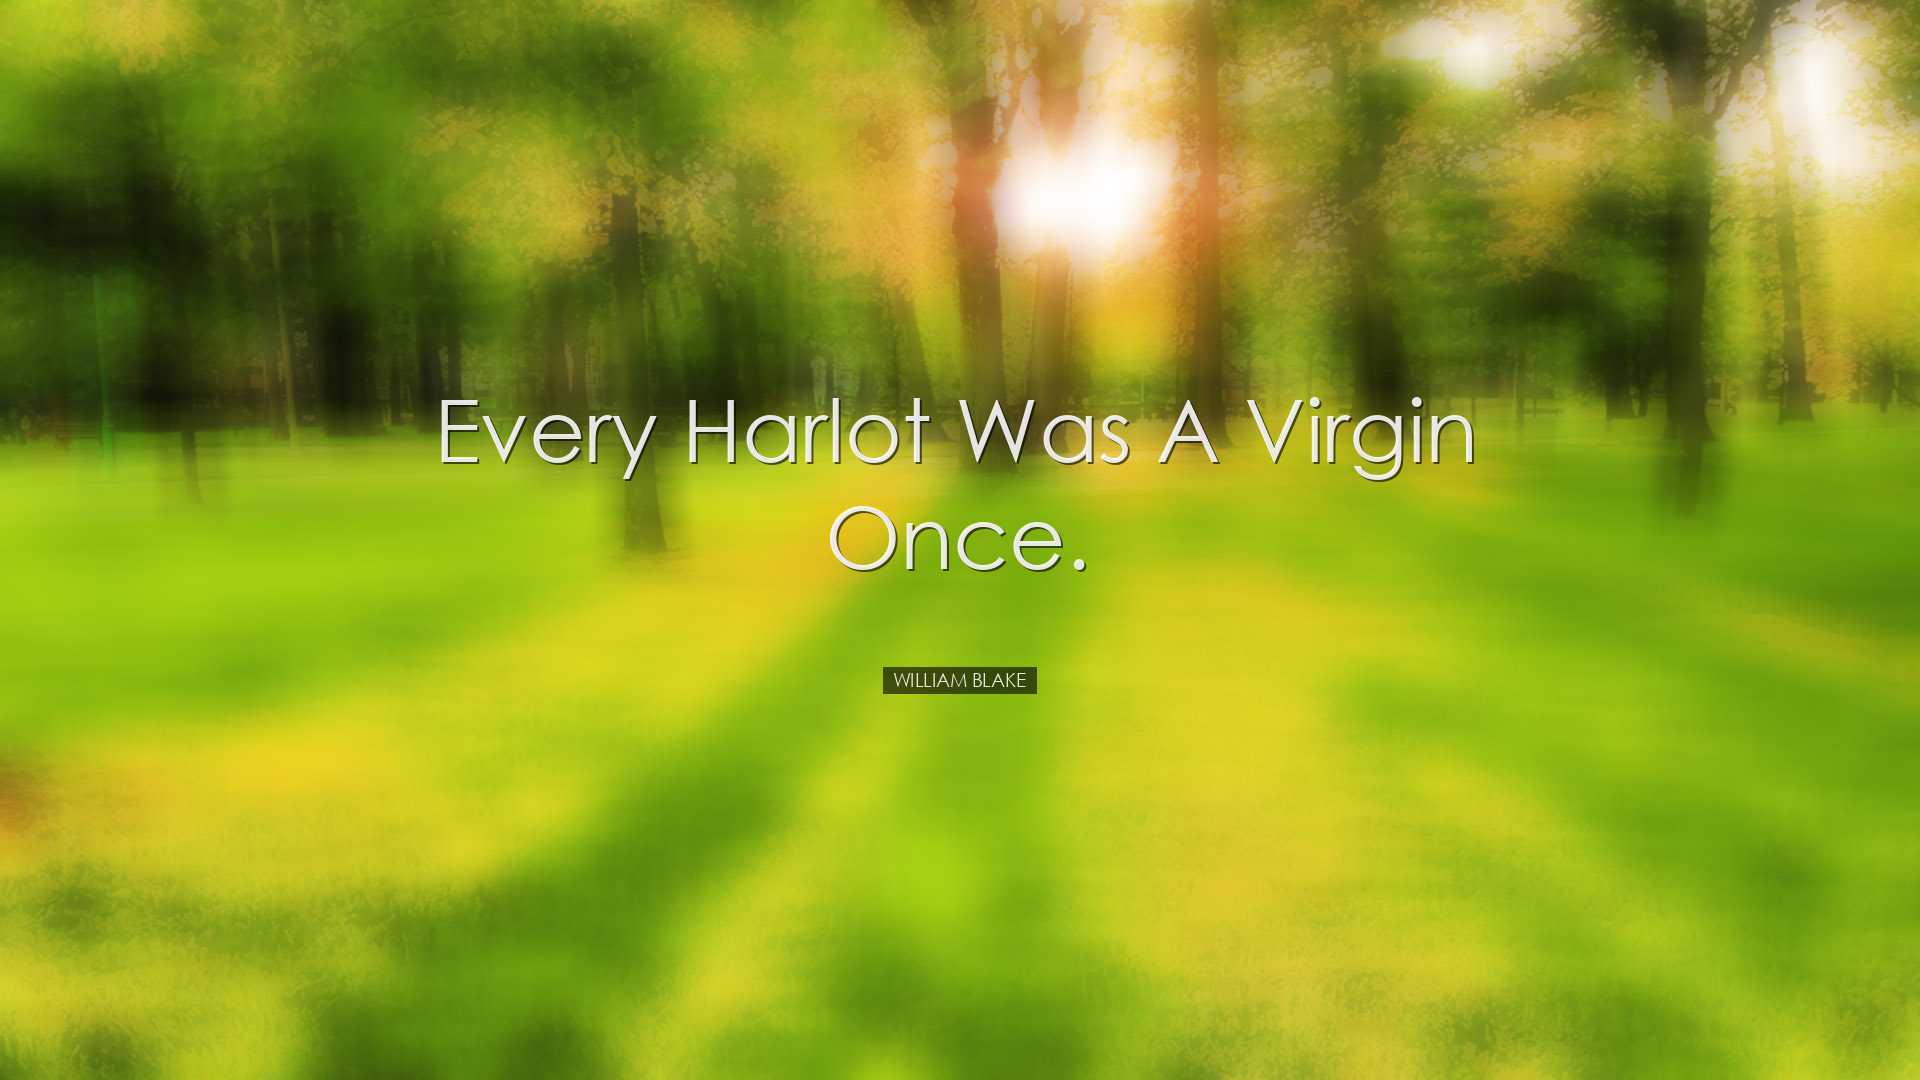 Every harlot was a virgin once. - William Blake